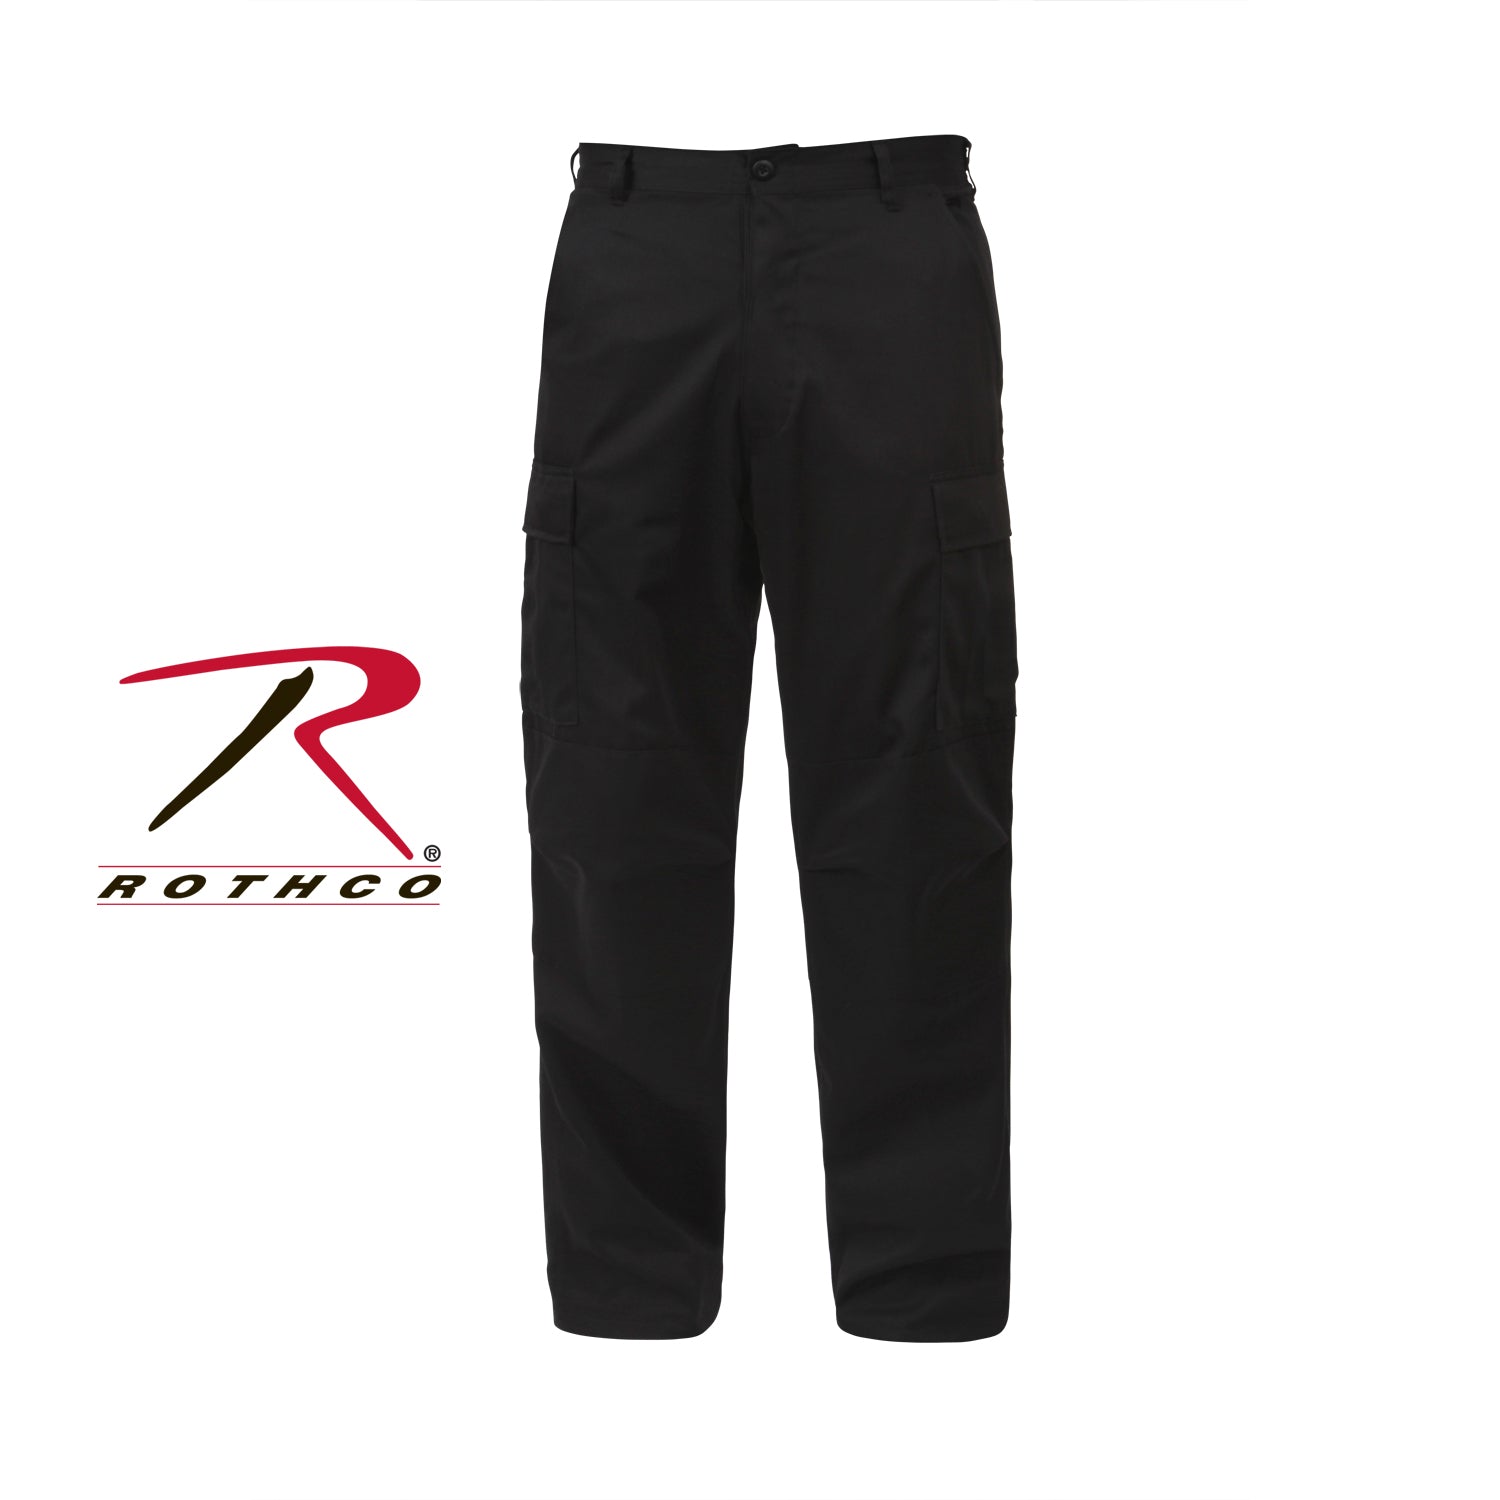 Rothco Rip-Stop BDU Pants - Eminent Paintball And Airsoft